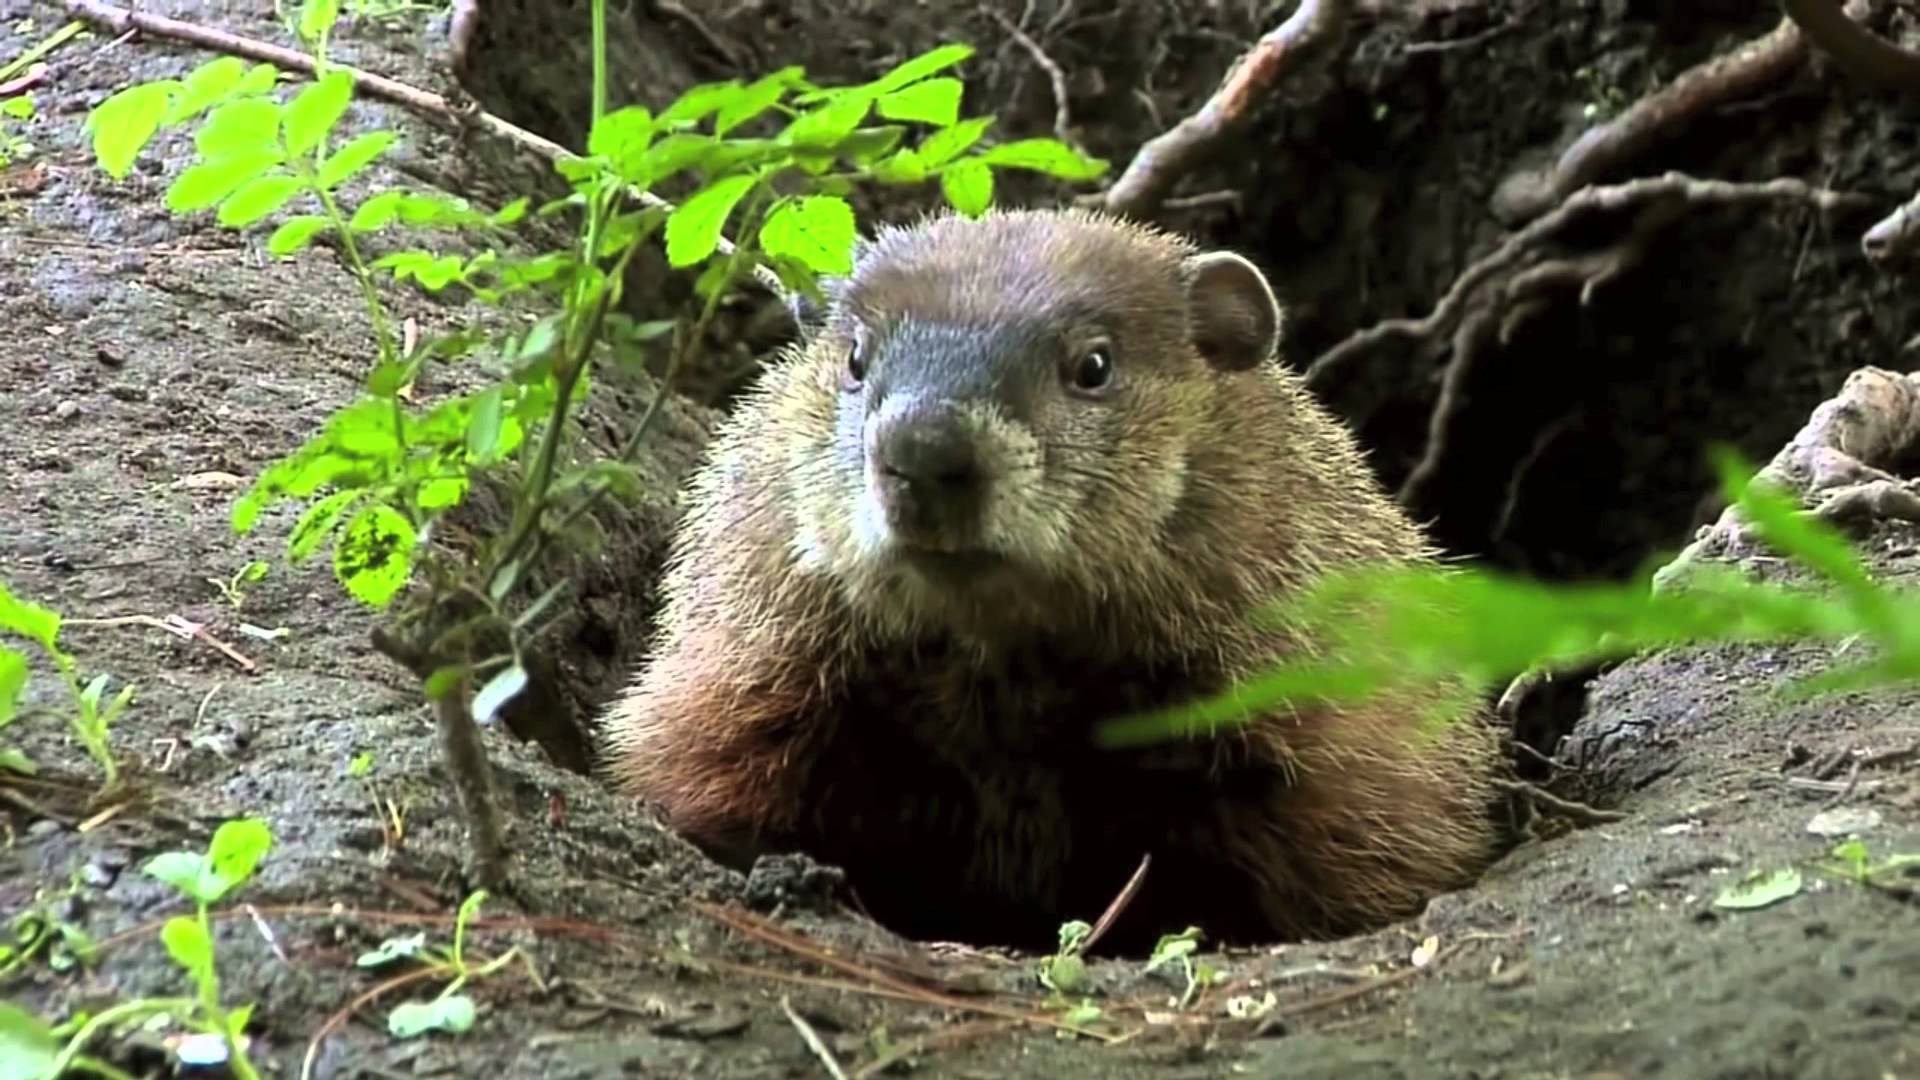 True Facts About the Groundhog - YouTube